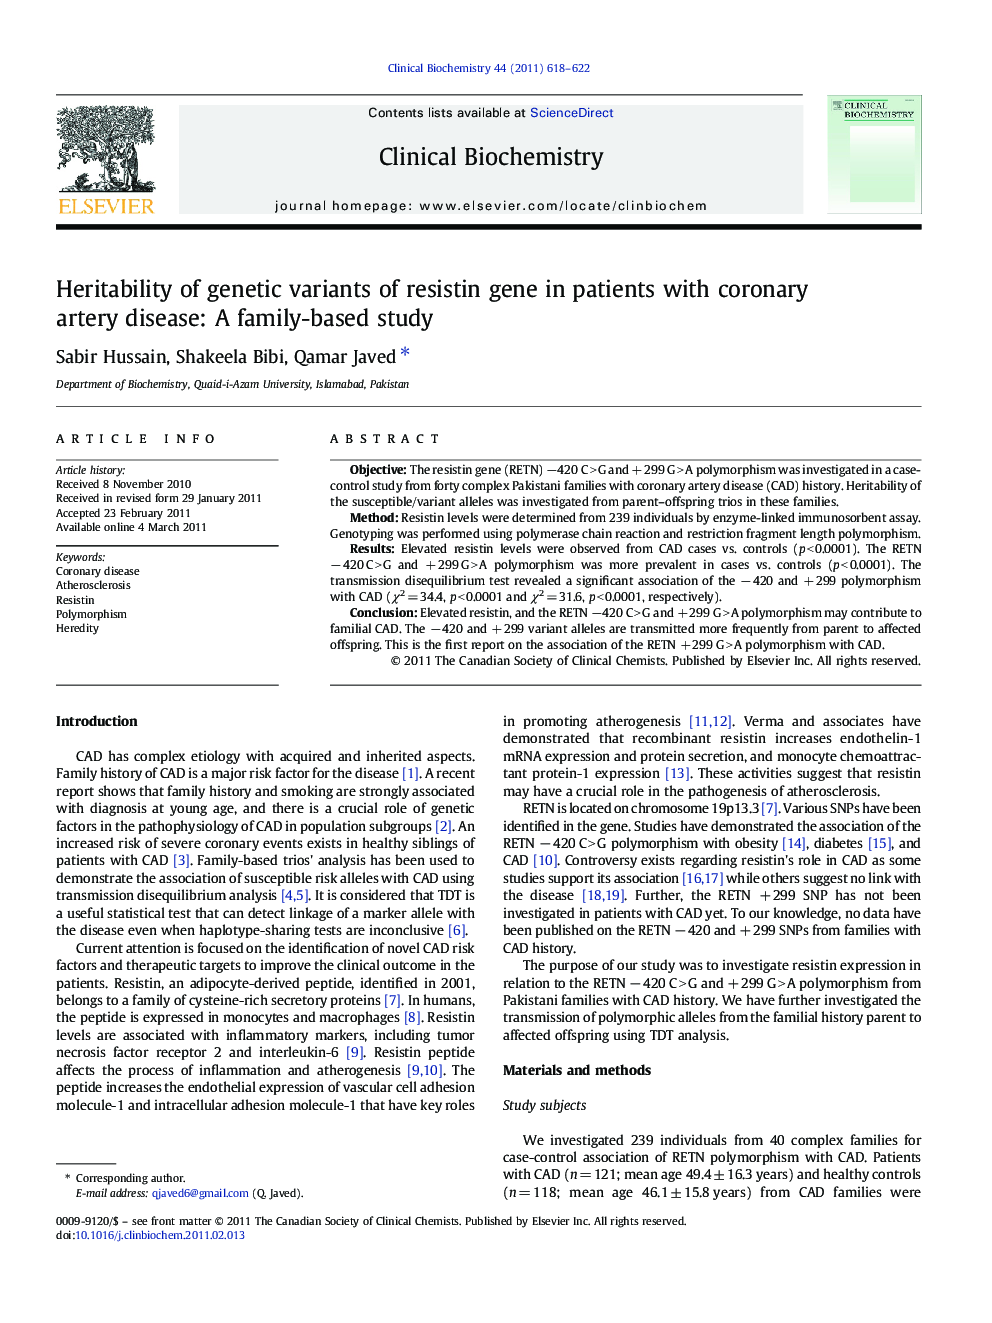 Heritability of genetic variants of resistin gene in patients with coronary artery disease: A family-based study